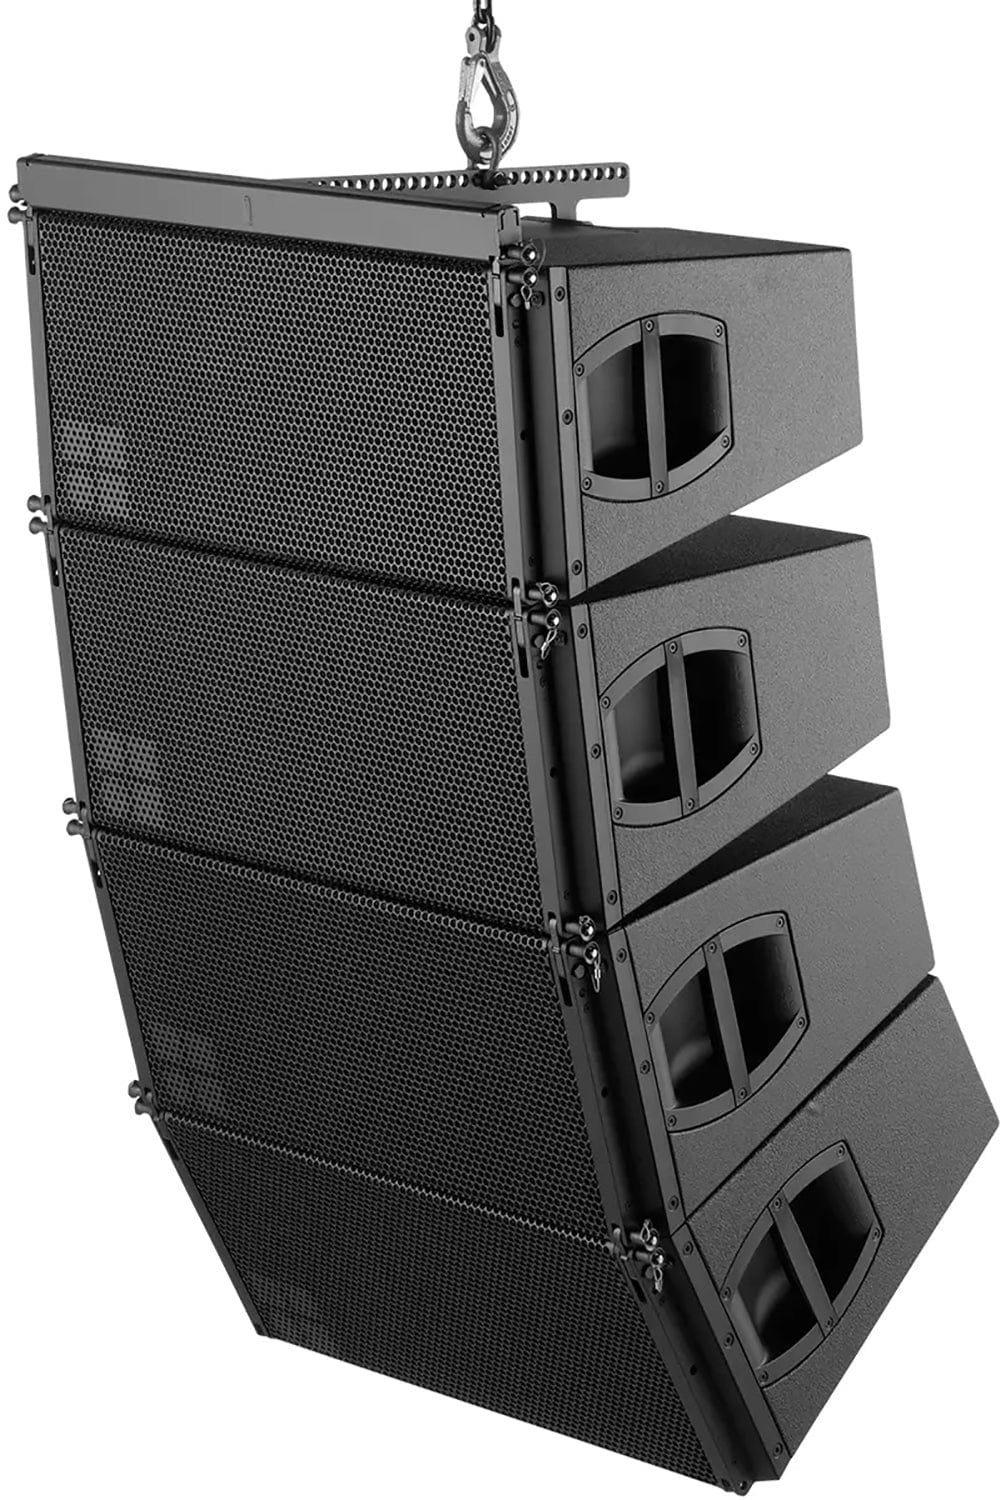 D&B Audiotechnik Z0516.001 V12 Loudspeaker with NL4 Connections - PSSL ProSound and Stage Lighting